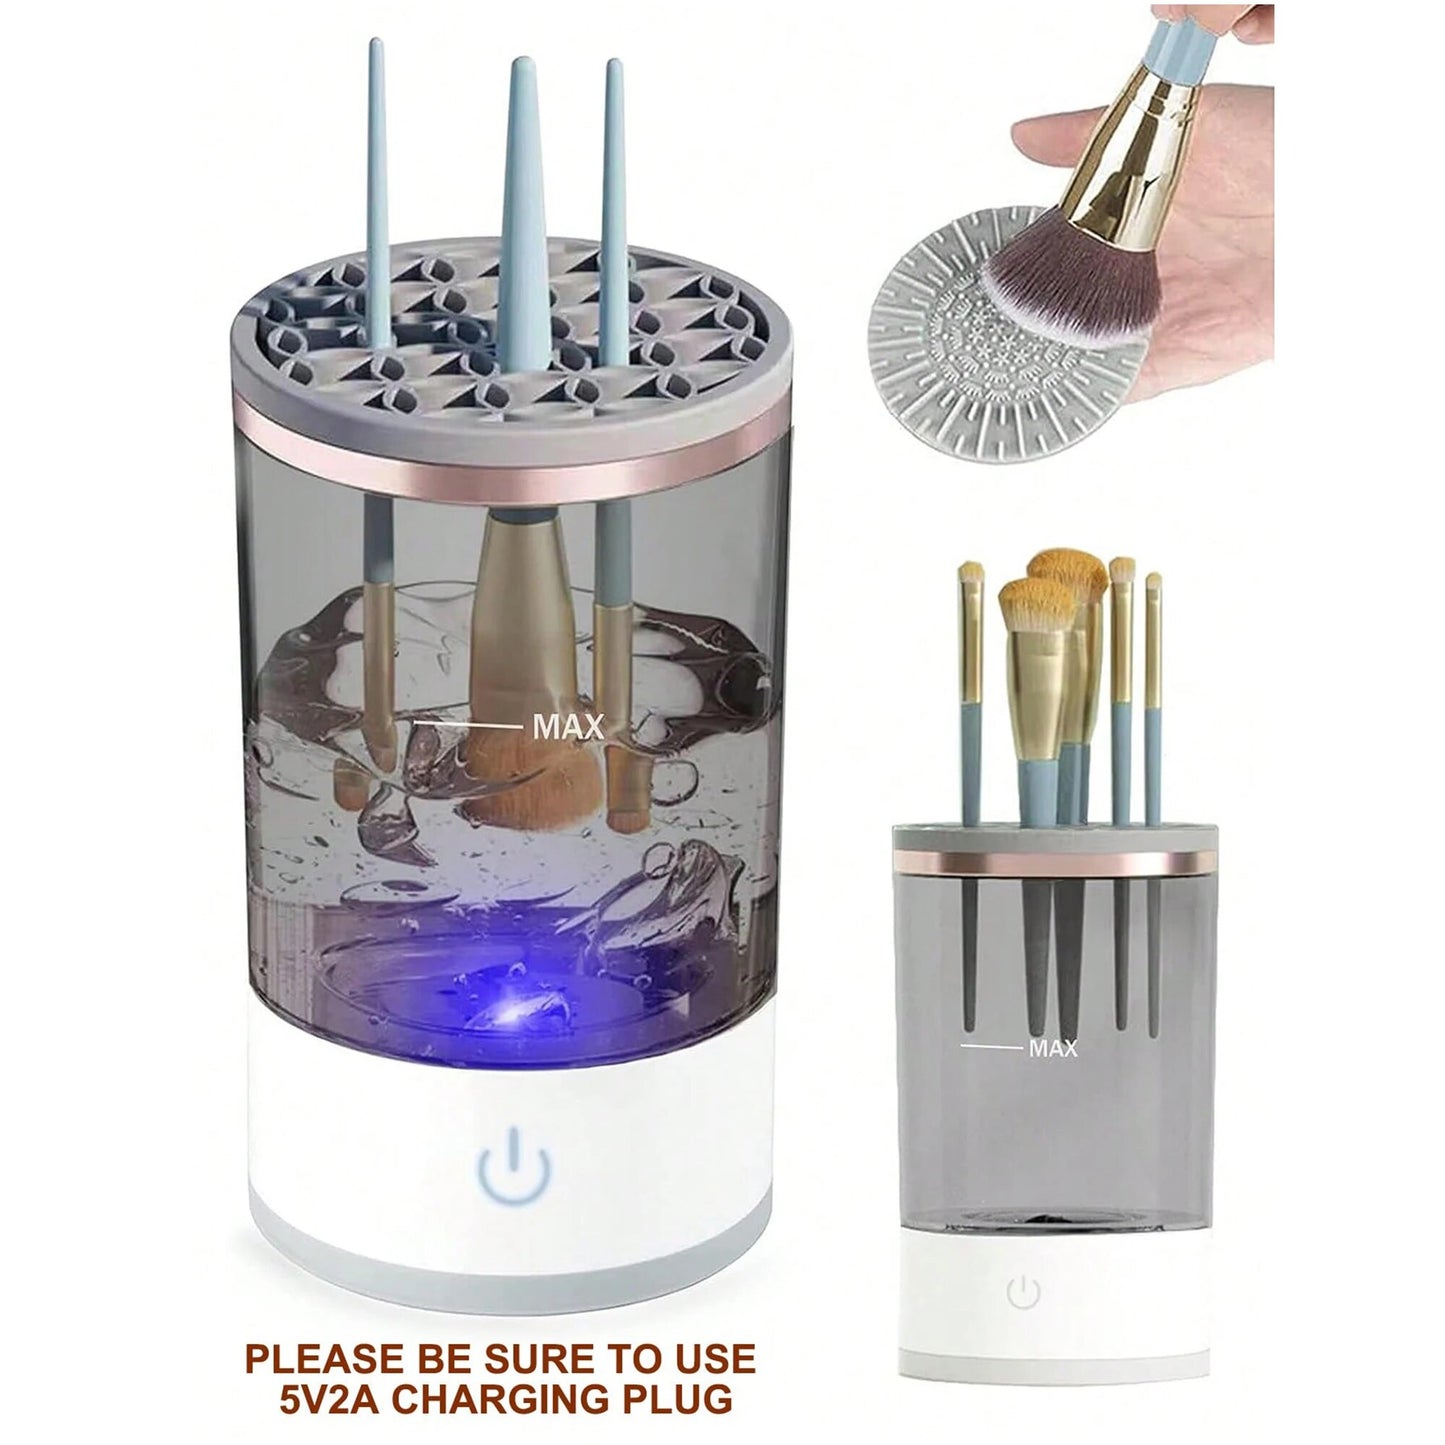 Automatic Electric Makeup Brush Cleaner with USB Makeup Brush Cleaning Tools Automatically Cleaning Makeup Brushes